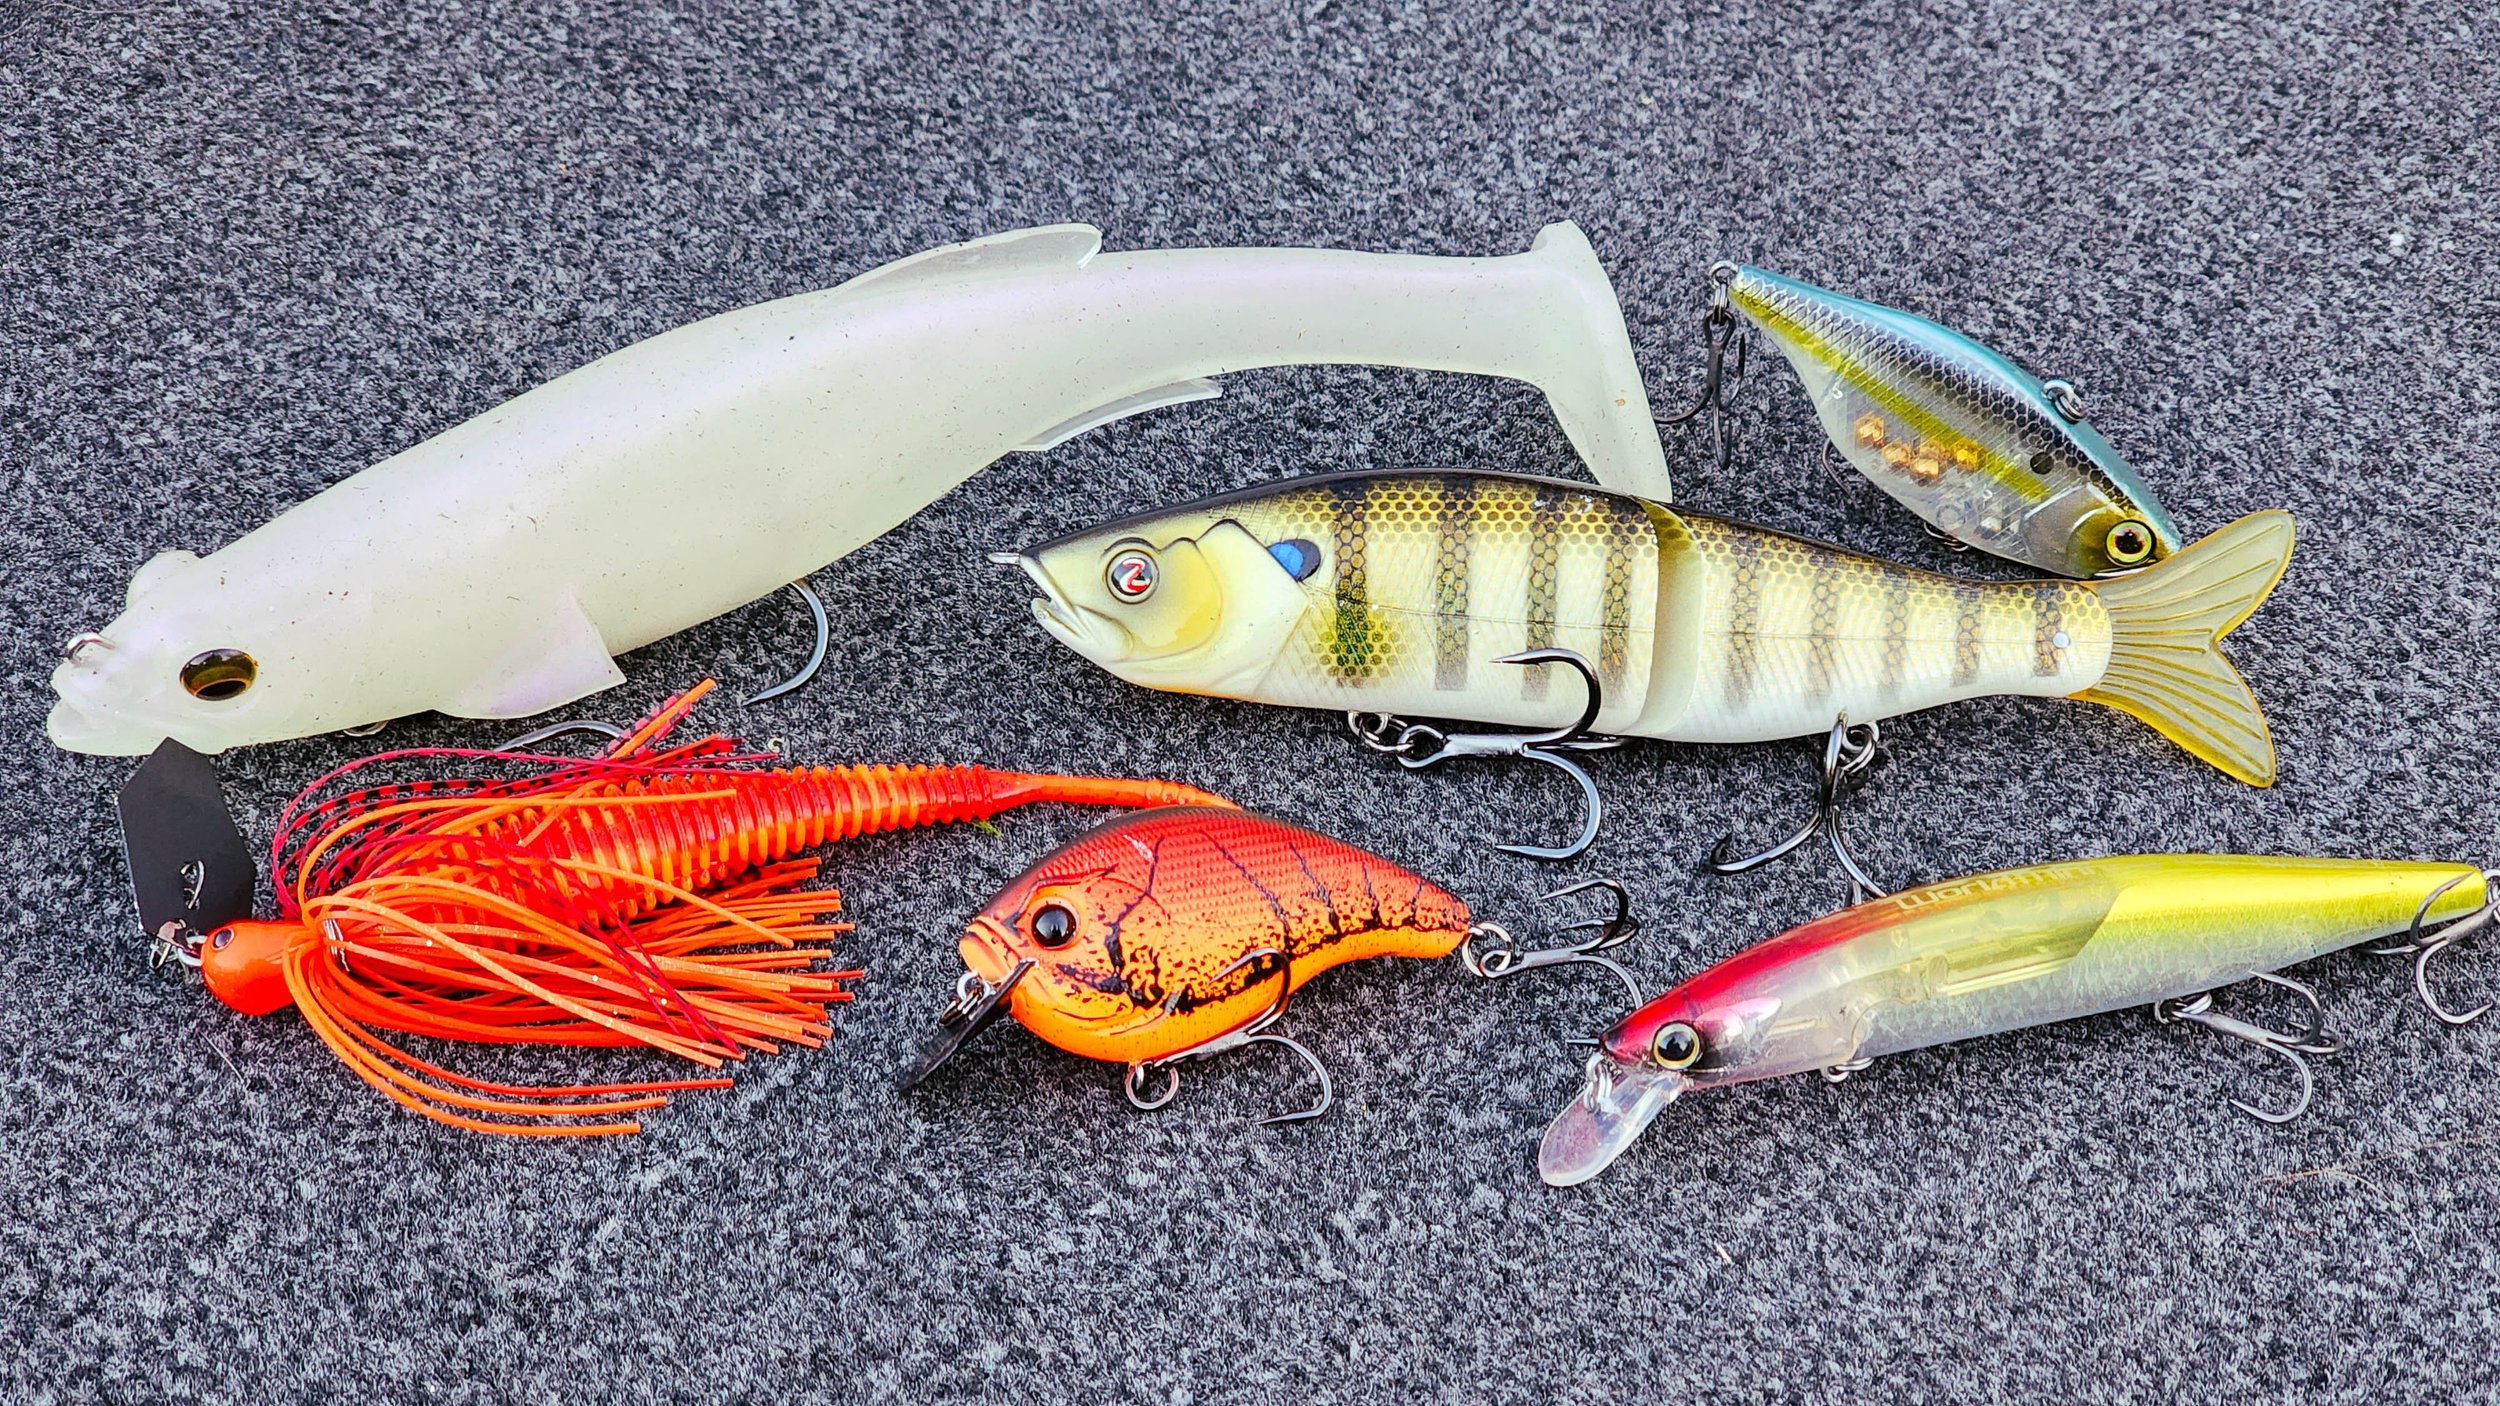 Top 5 Baits For March Bass Fishing! — Tactical Bassin' - Bass